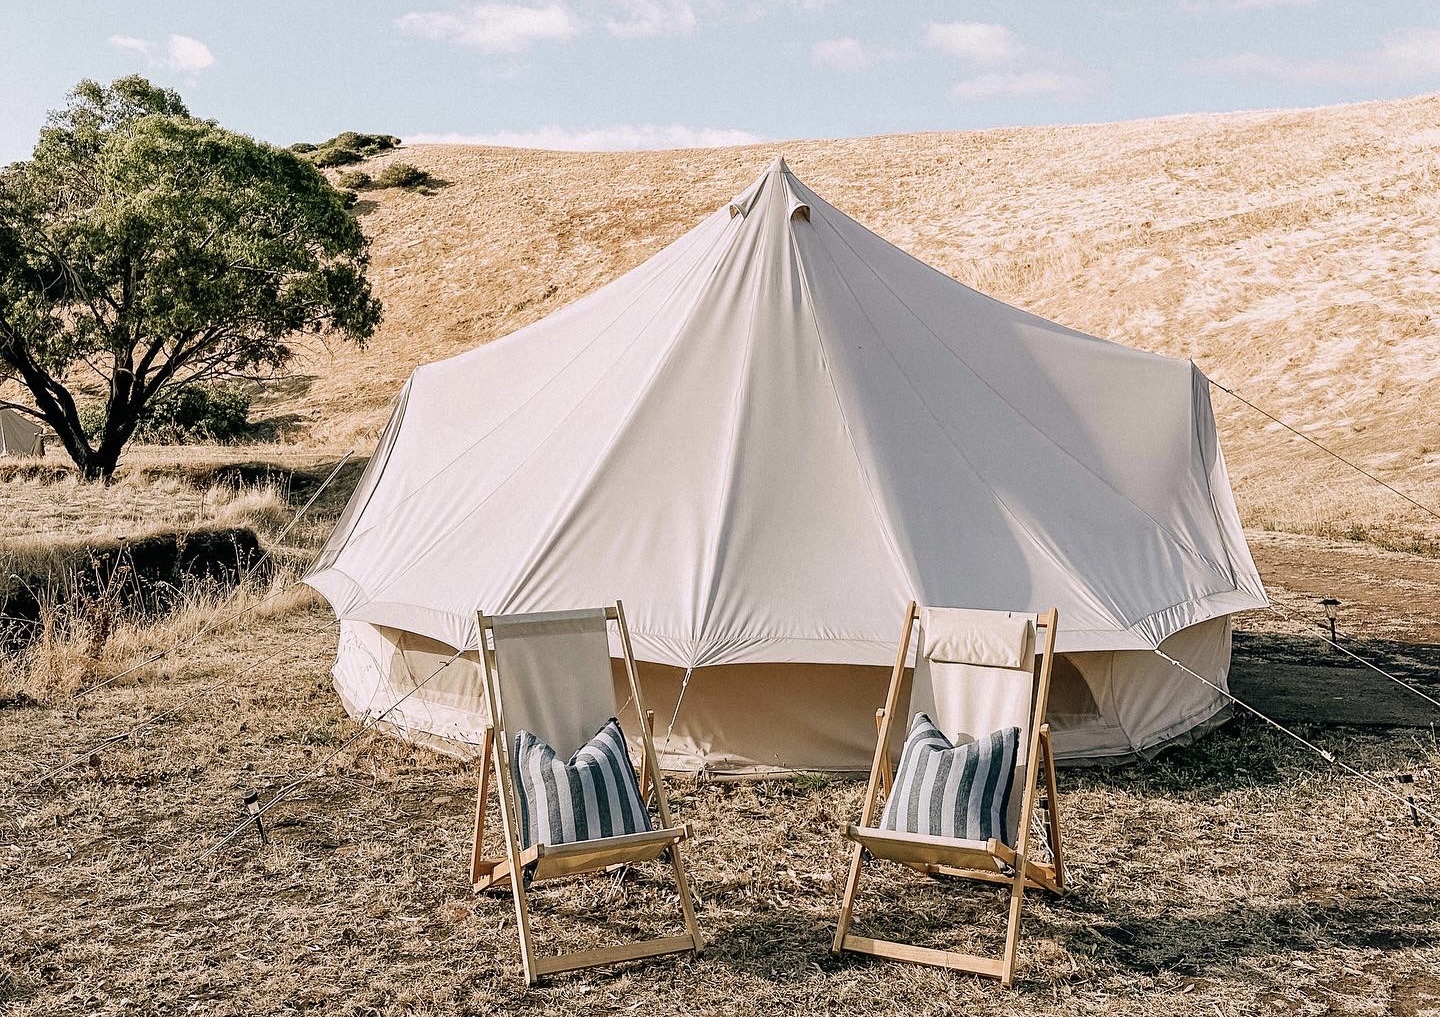 WIN a Glamping Experience at Lessismore Farm Worth $300!